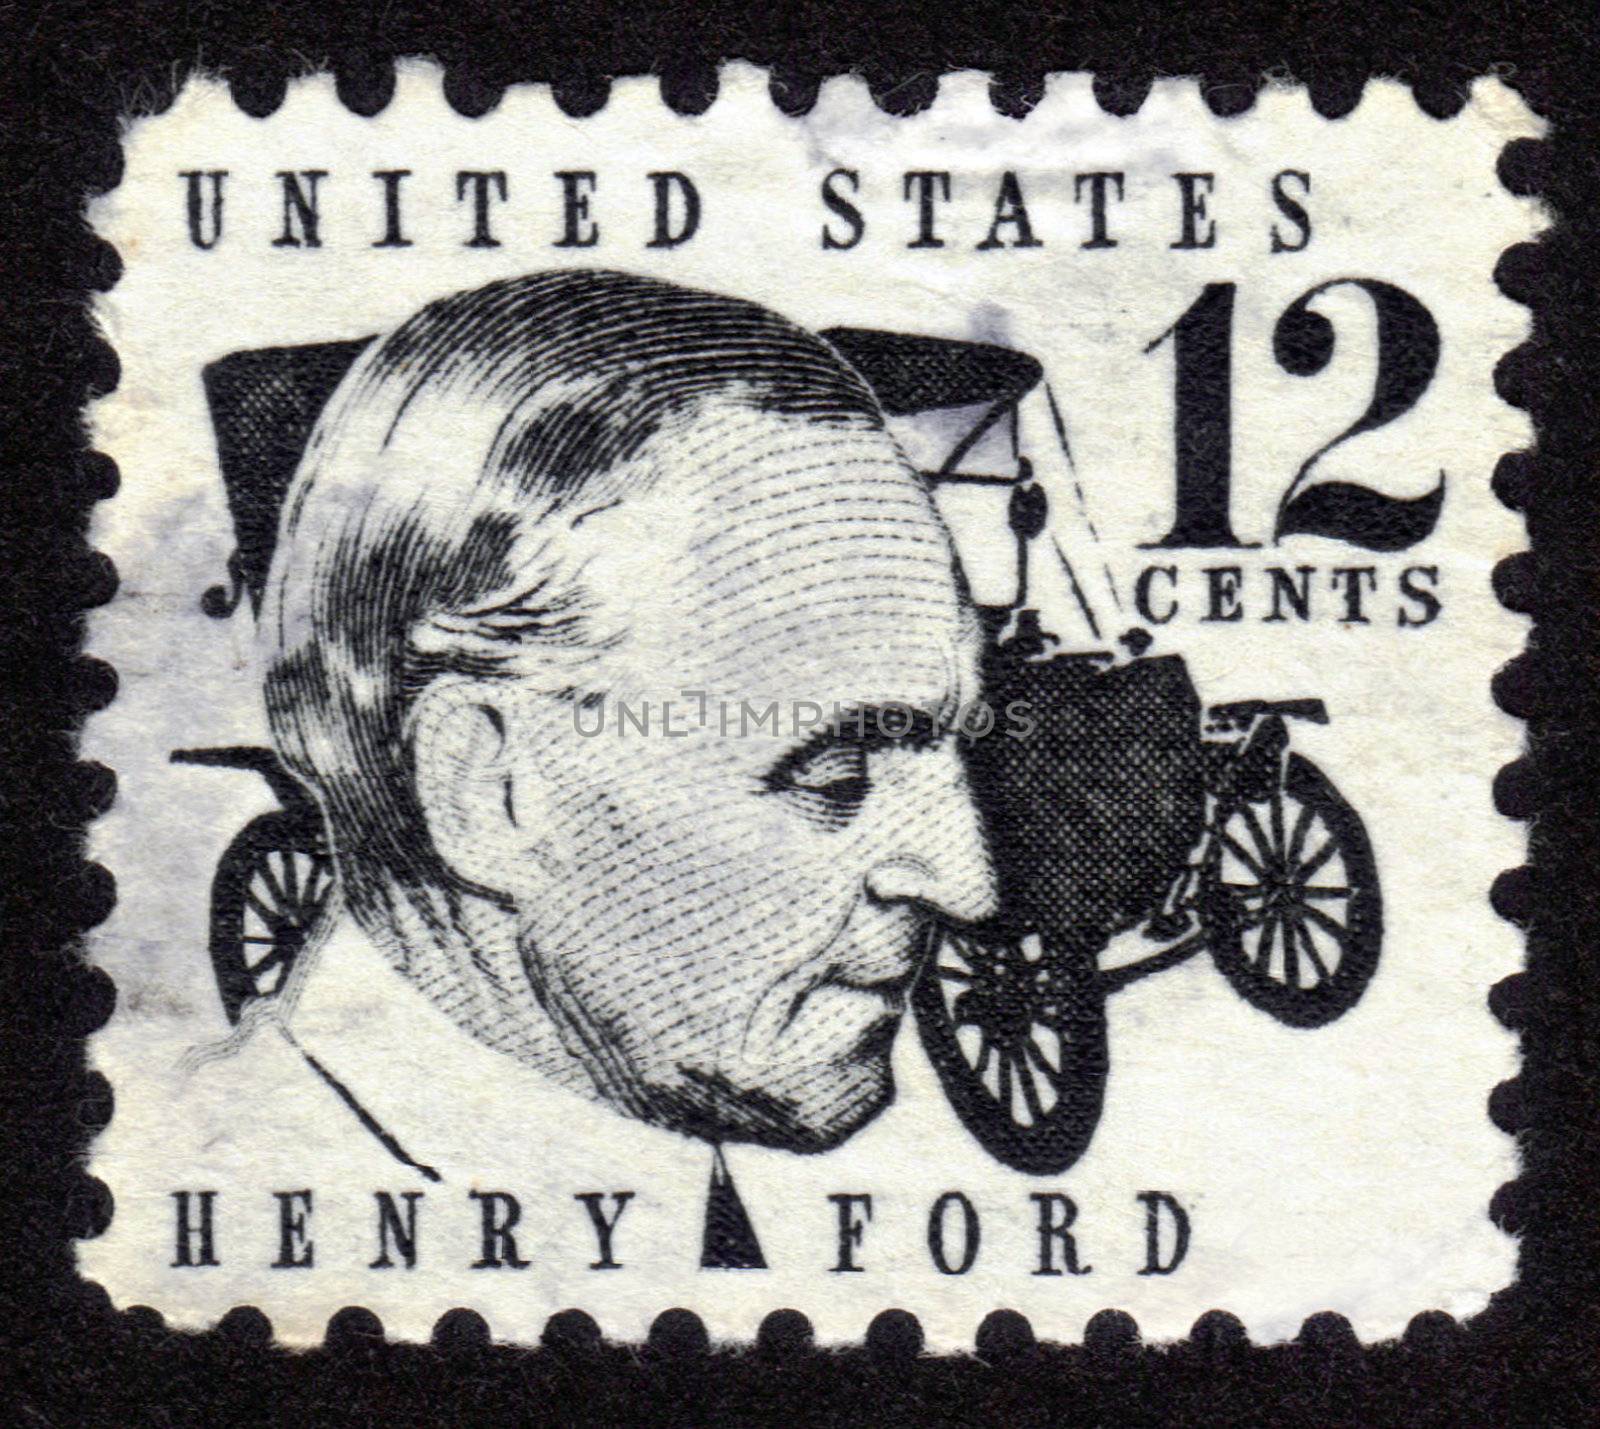 USA - CIRCA 1970: A stamp shows image portrait Henry Ford (1863 - 1947) and car Ford Model T was a prominent American industrialist, the founder of the Ford Motor Company, circa 1970.